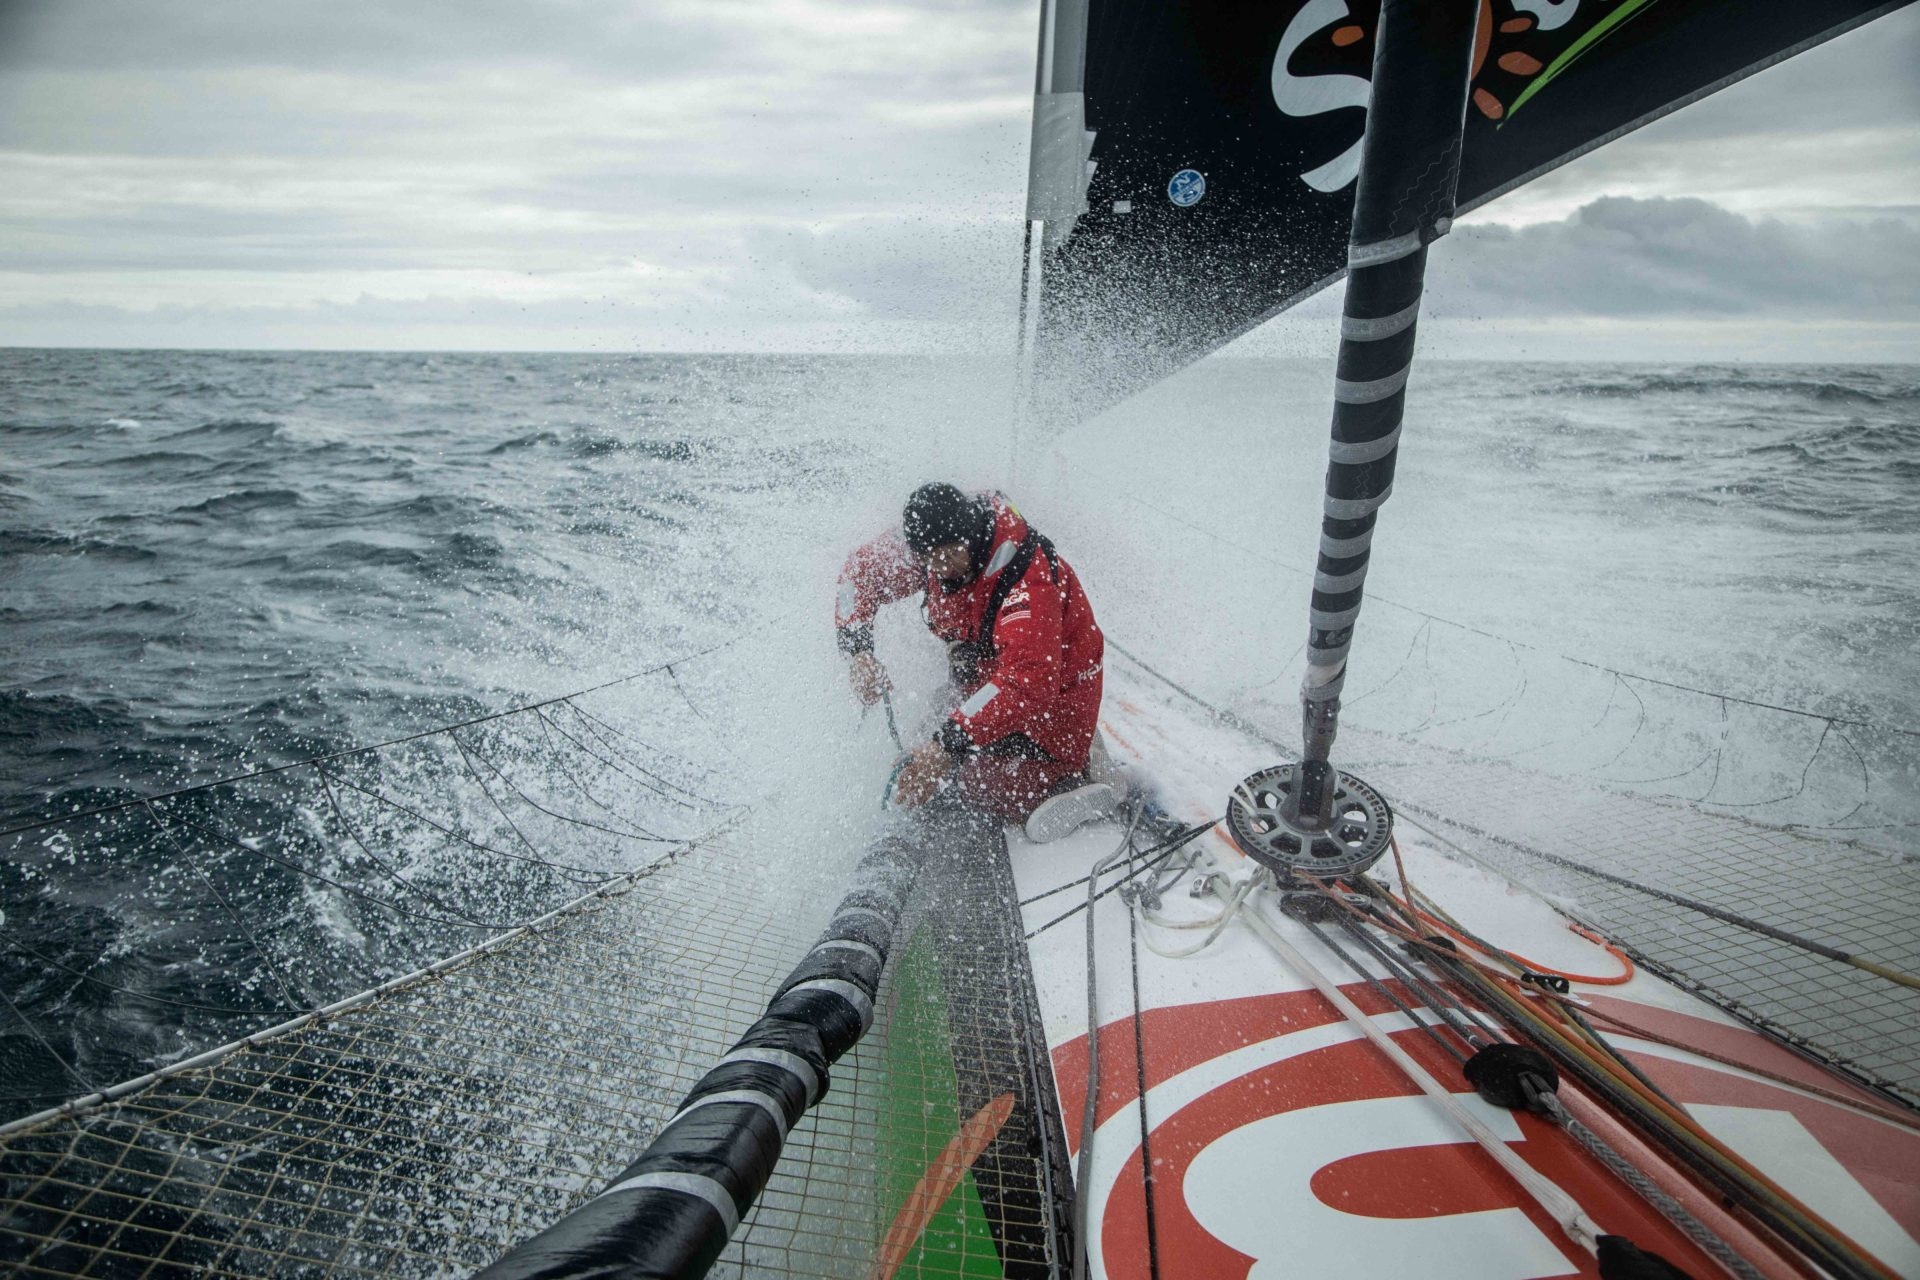  Trophee Jules Verne  Day 17  Sodebo abandons the record attempt due to rudder damage